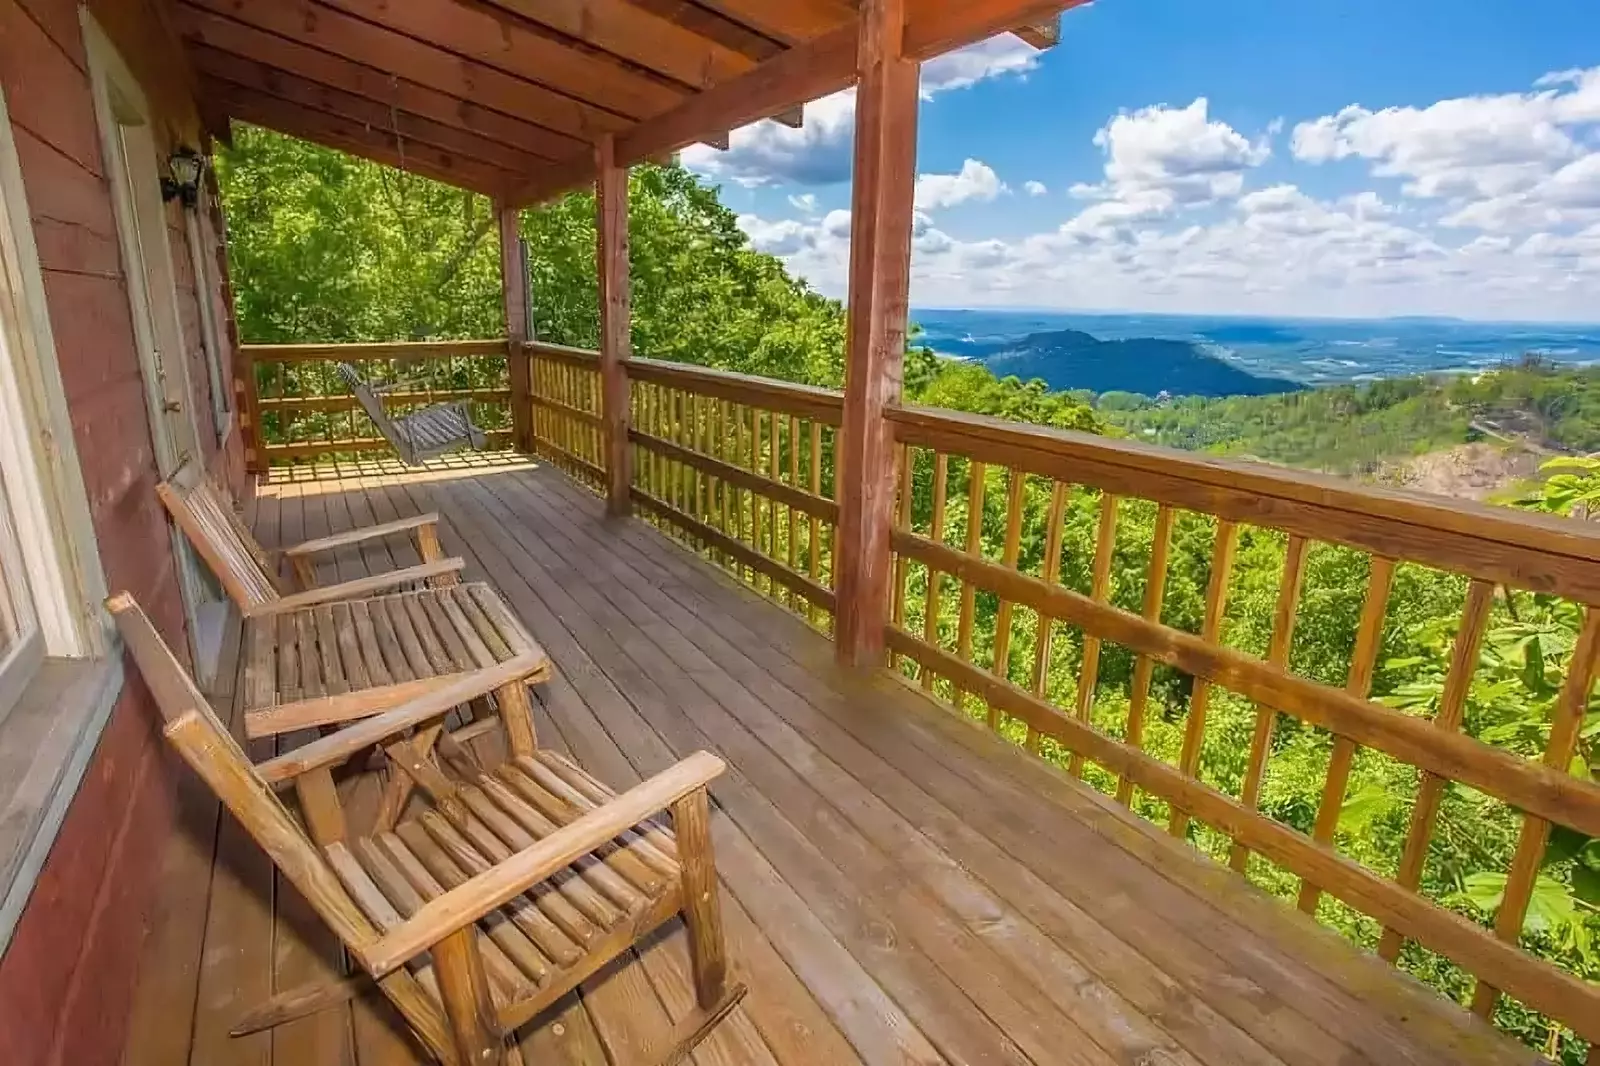 Stunning mountain views from the deck of the Rocky Top cabin in Pigeon Forge.